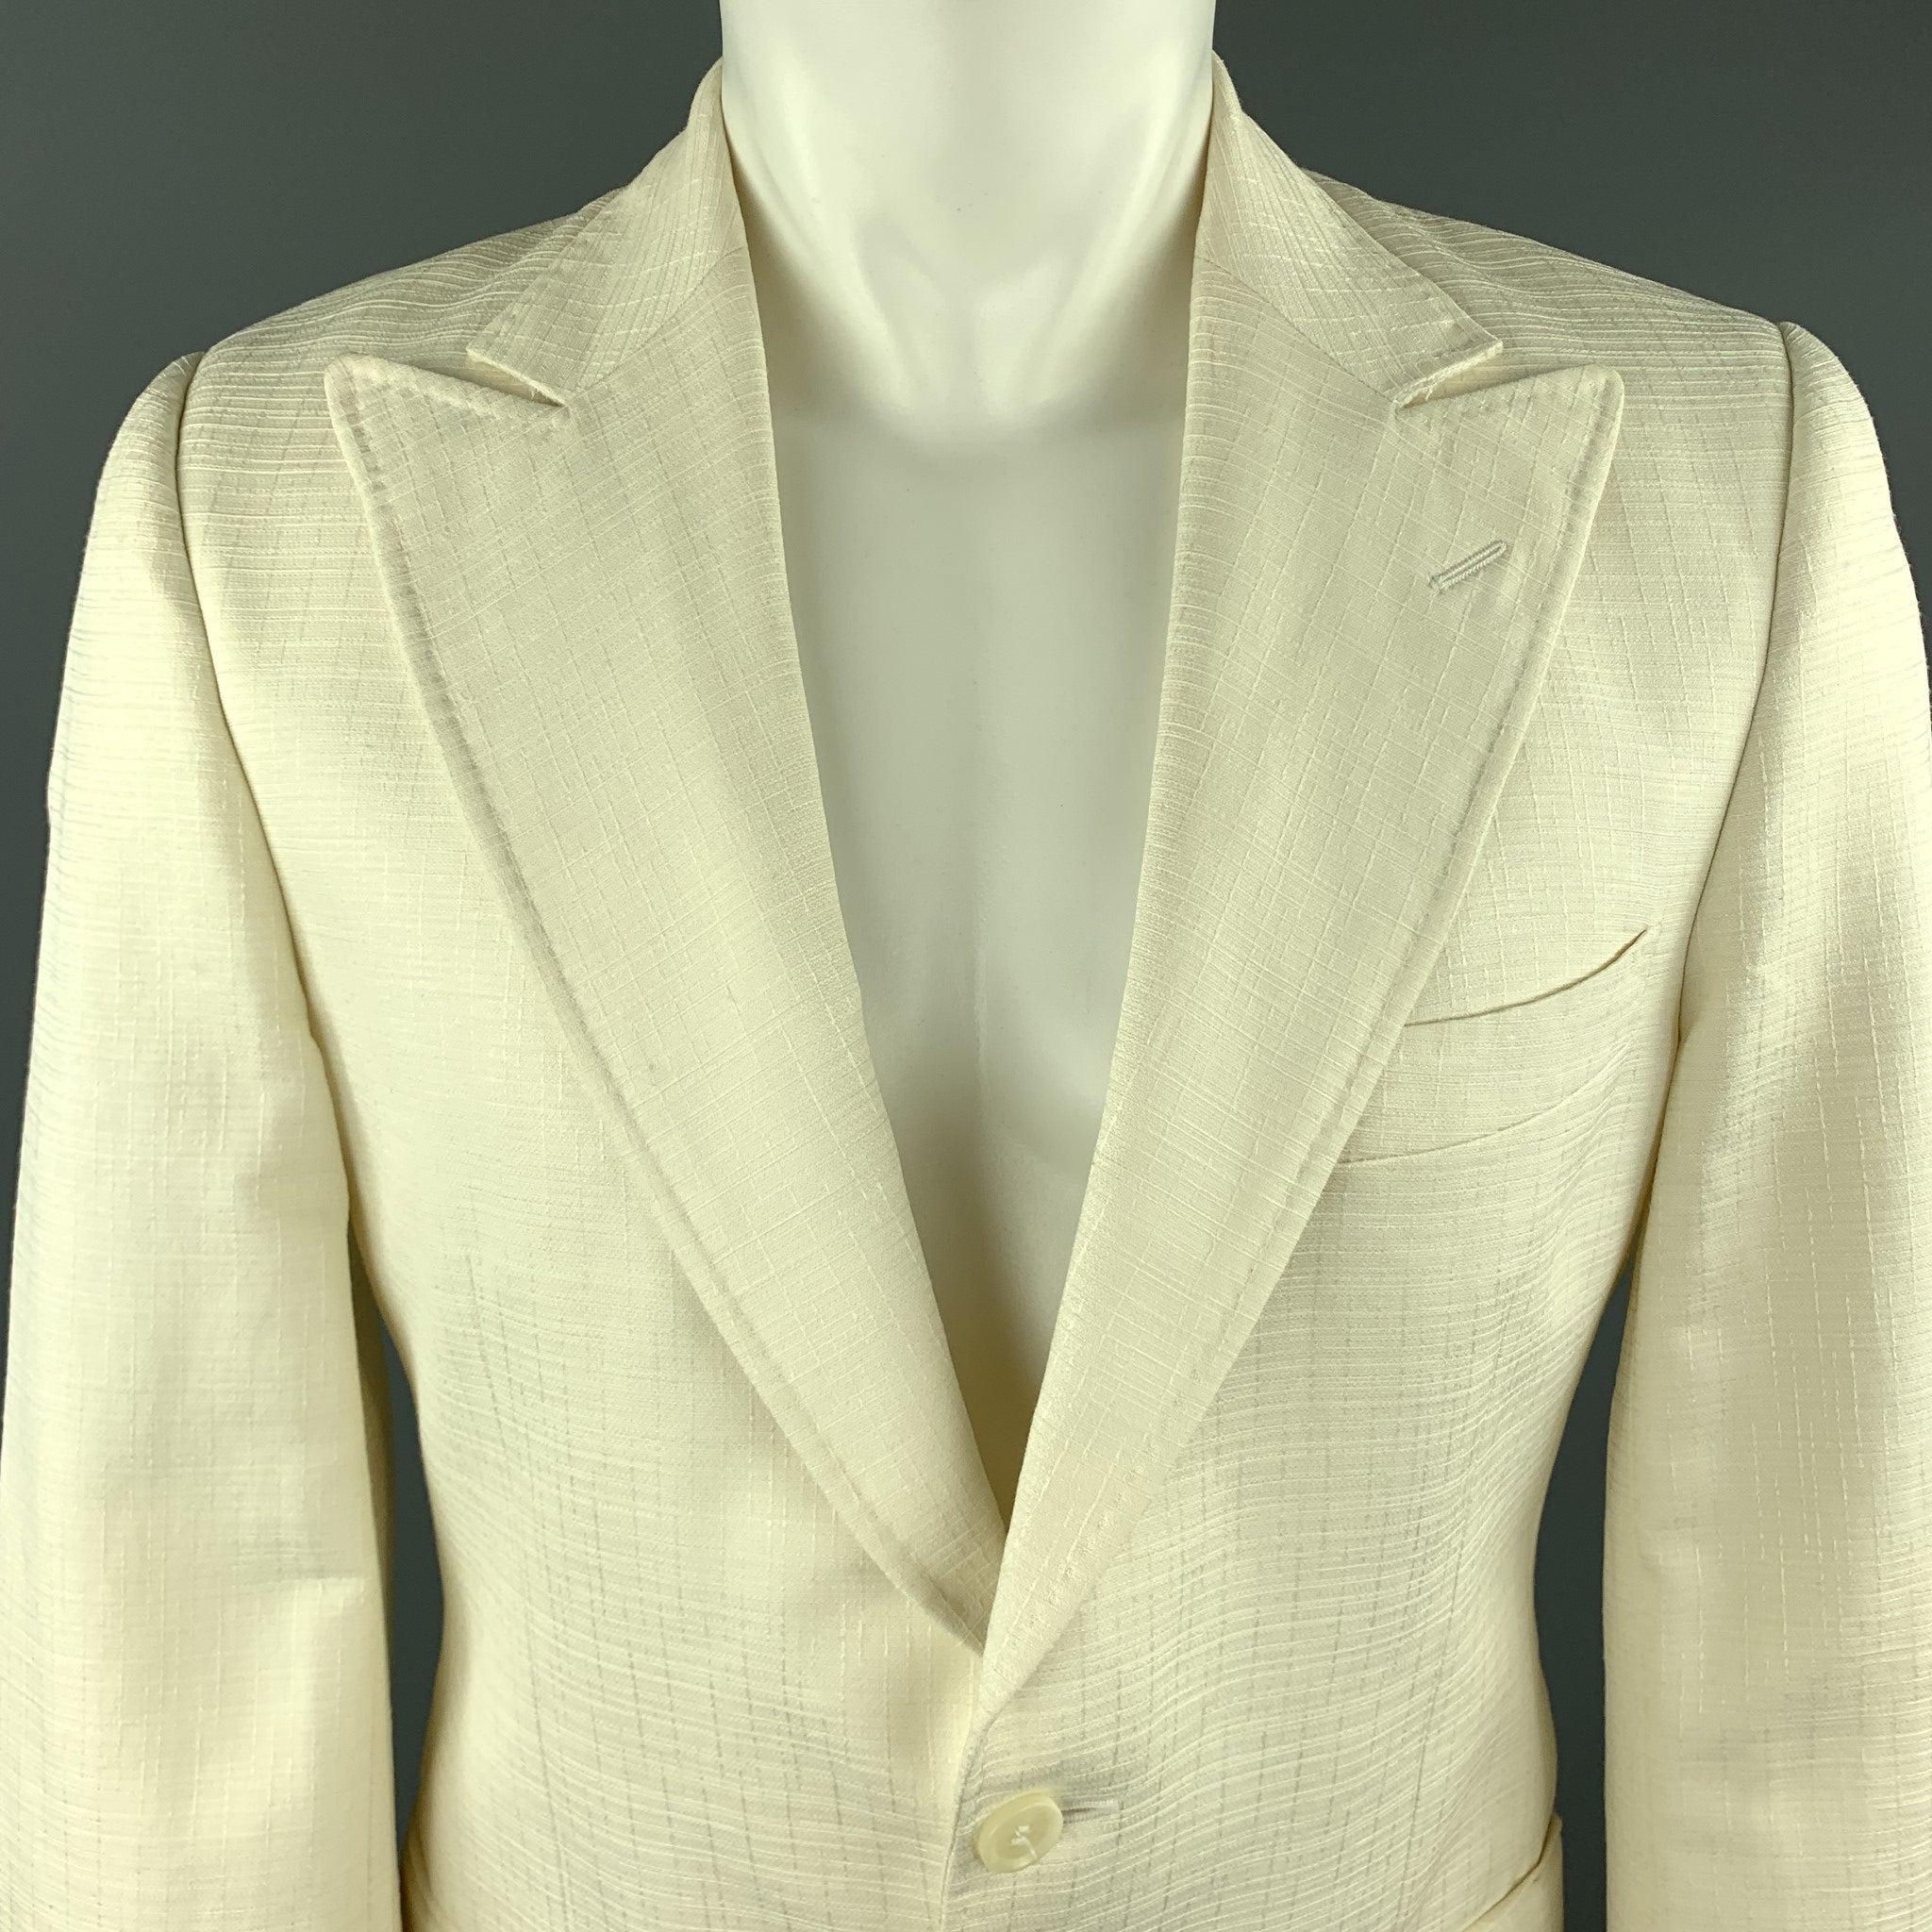 DOLCE & GABBANA
sport coat comes in textured cotton silk blend with a peak lapel, single breasted, two button front, and flap pockets. Made in italy.Very Good Pre-Owned Condition.
 

Marked:   IT 50 

Measurements: 
 
Shoulder: 17 inches Chest:
41